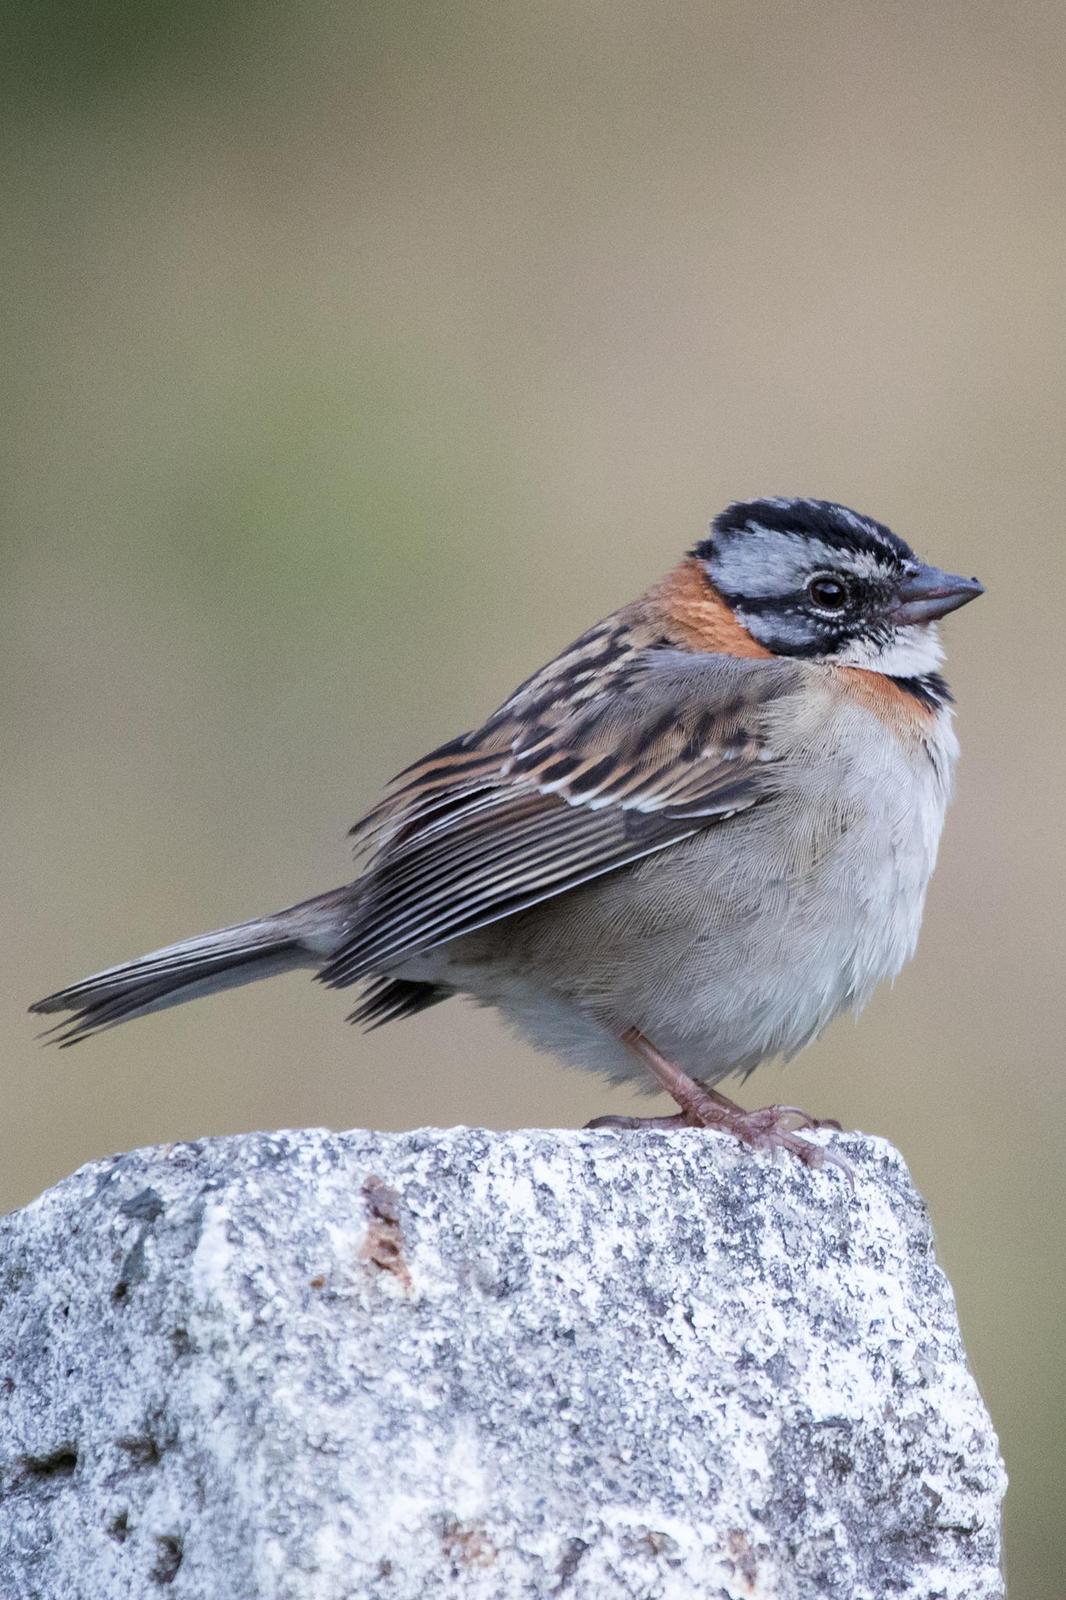 Rufous-collared Sparrow Photo by Ashley Bradford